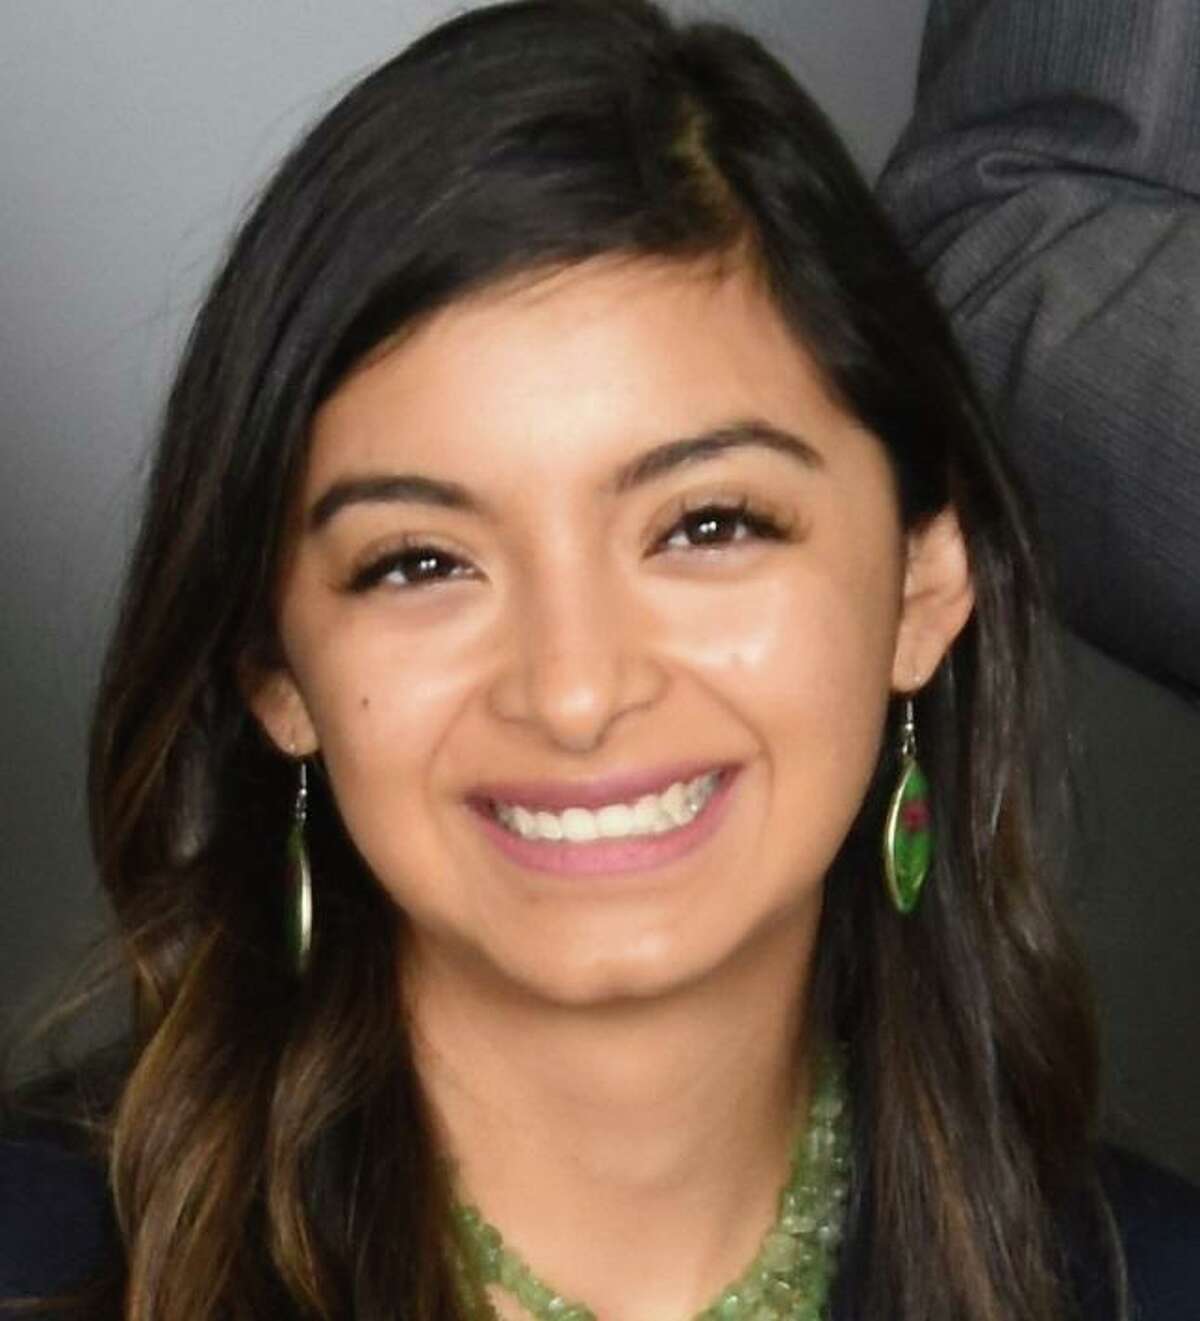 Pasadena High School math teacher Crystal Dávila is challenging longtime incumbent Mariselle Quijano in the May 1 election for Pasadena ISD’s Position 2 trustee seat.